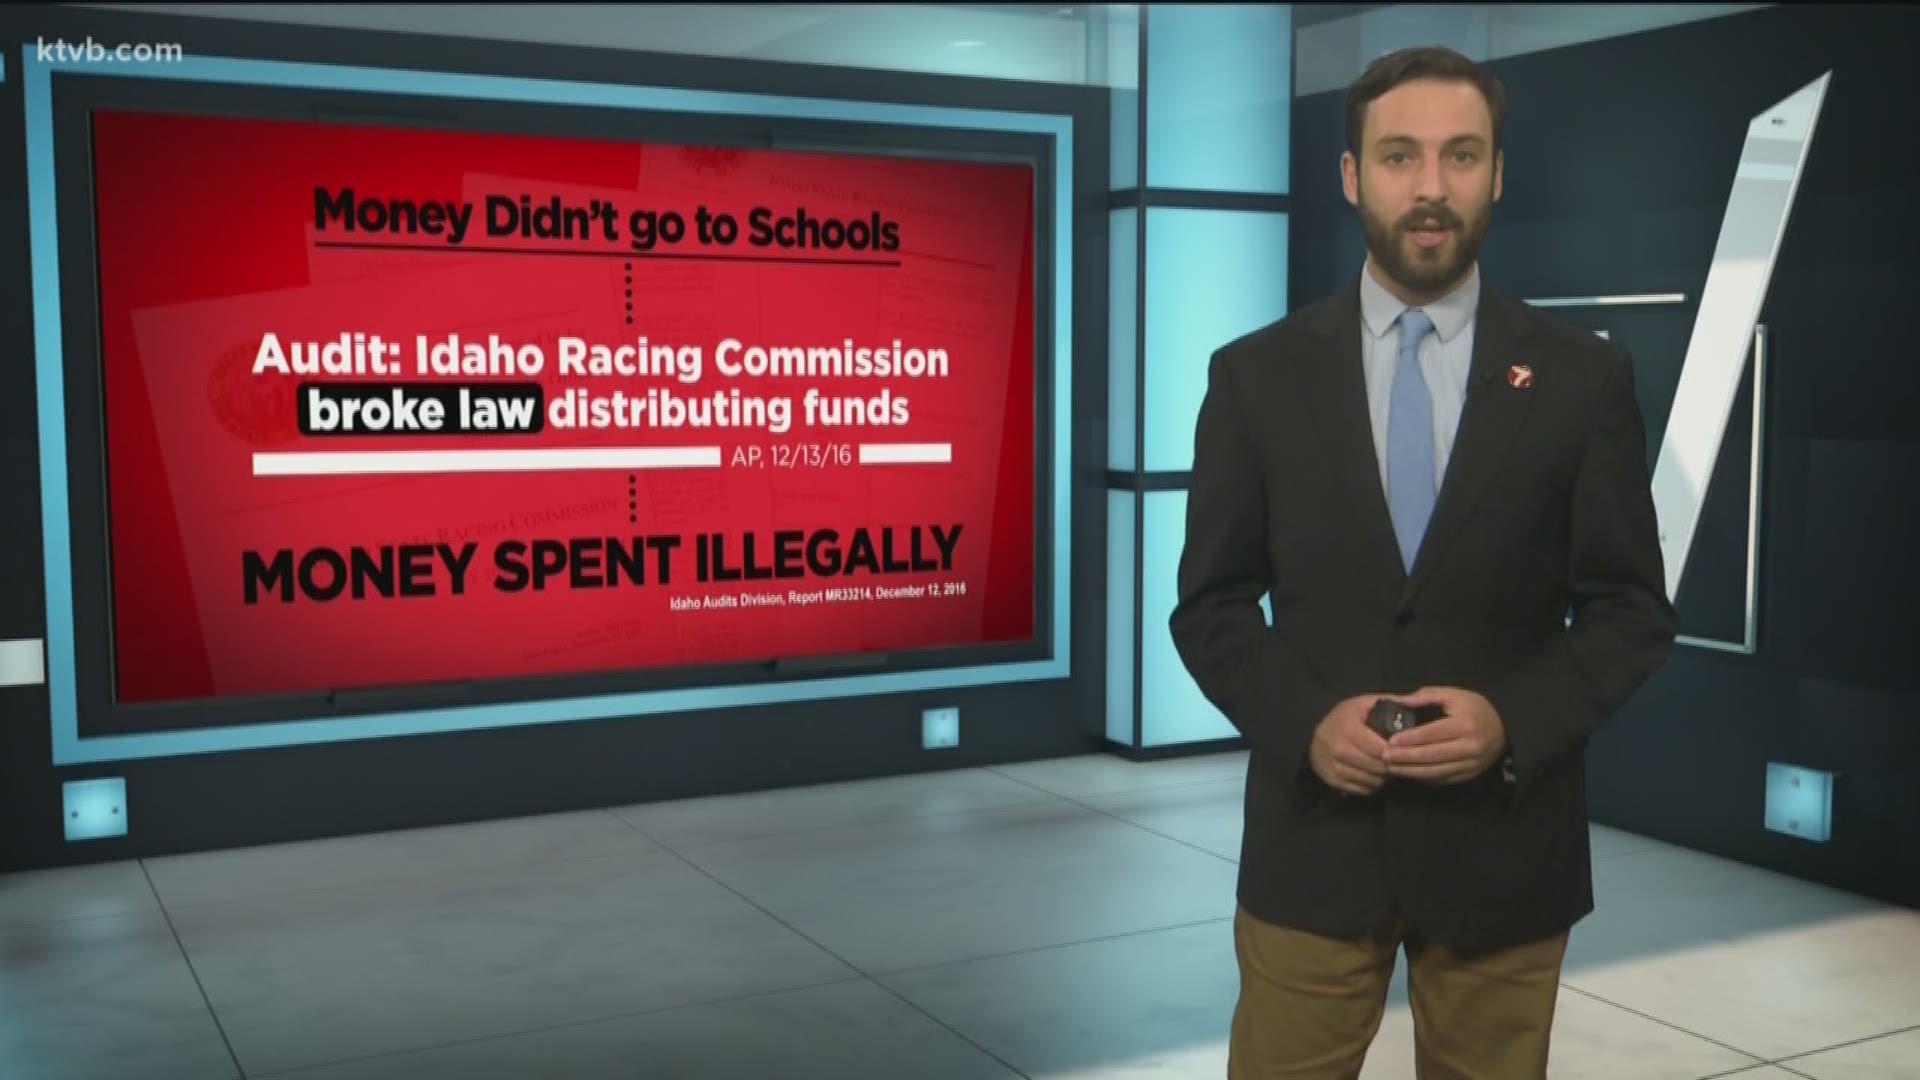 KTVB answers viewer questions about promises made in new campaign ads.